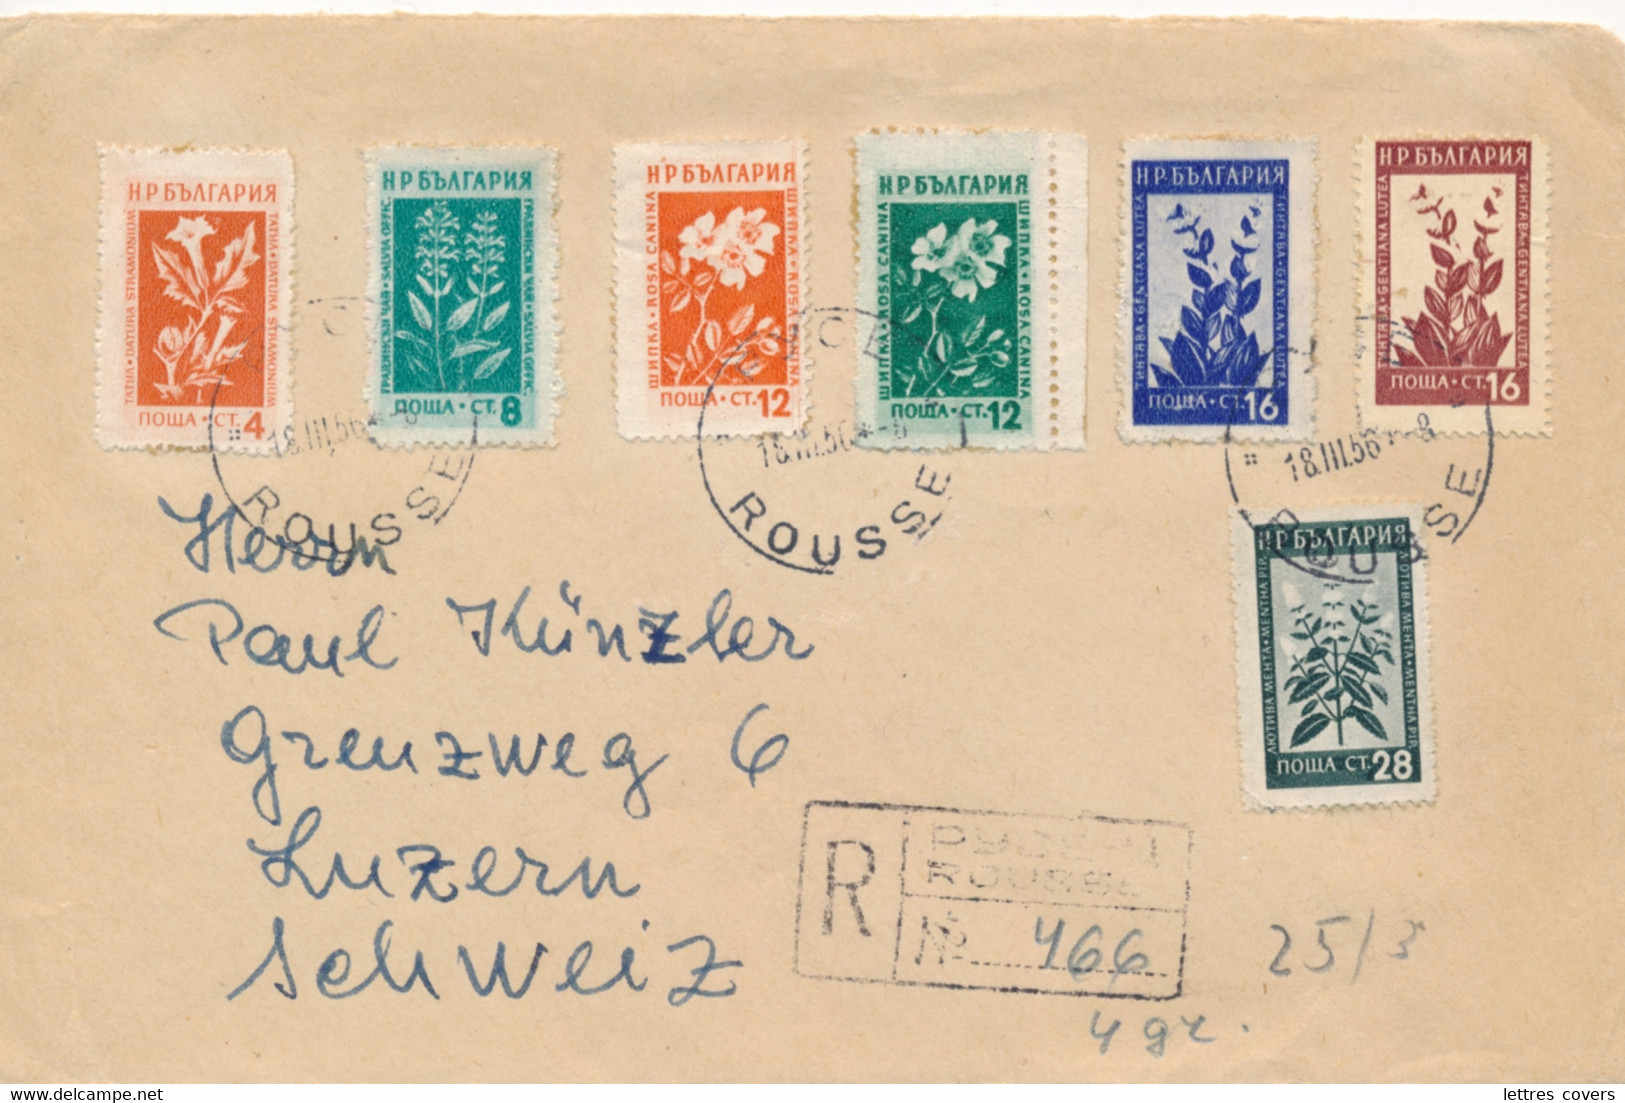 BULGARIA FLOWER SET Obl ROUSSE 18/3/56 - REGISTERED Cover To Switzerland Suisse - Fleurs Lettre - Covers & Documents